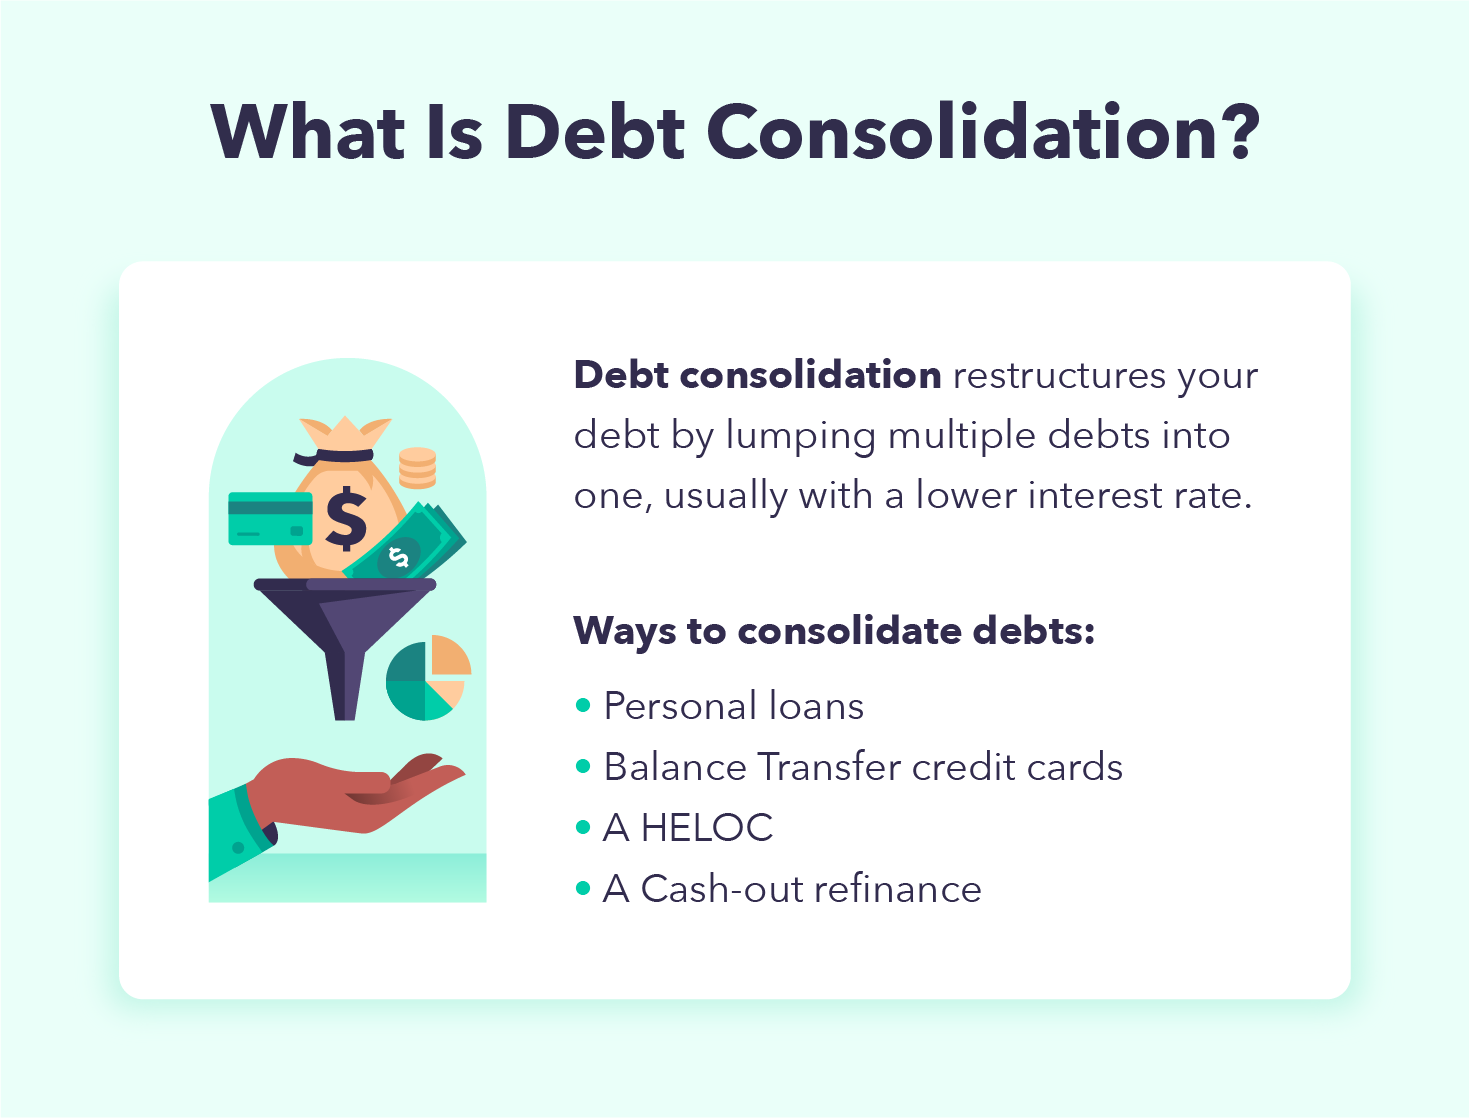 Debt consolidation restructures your debt from multiple streams into one. 